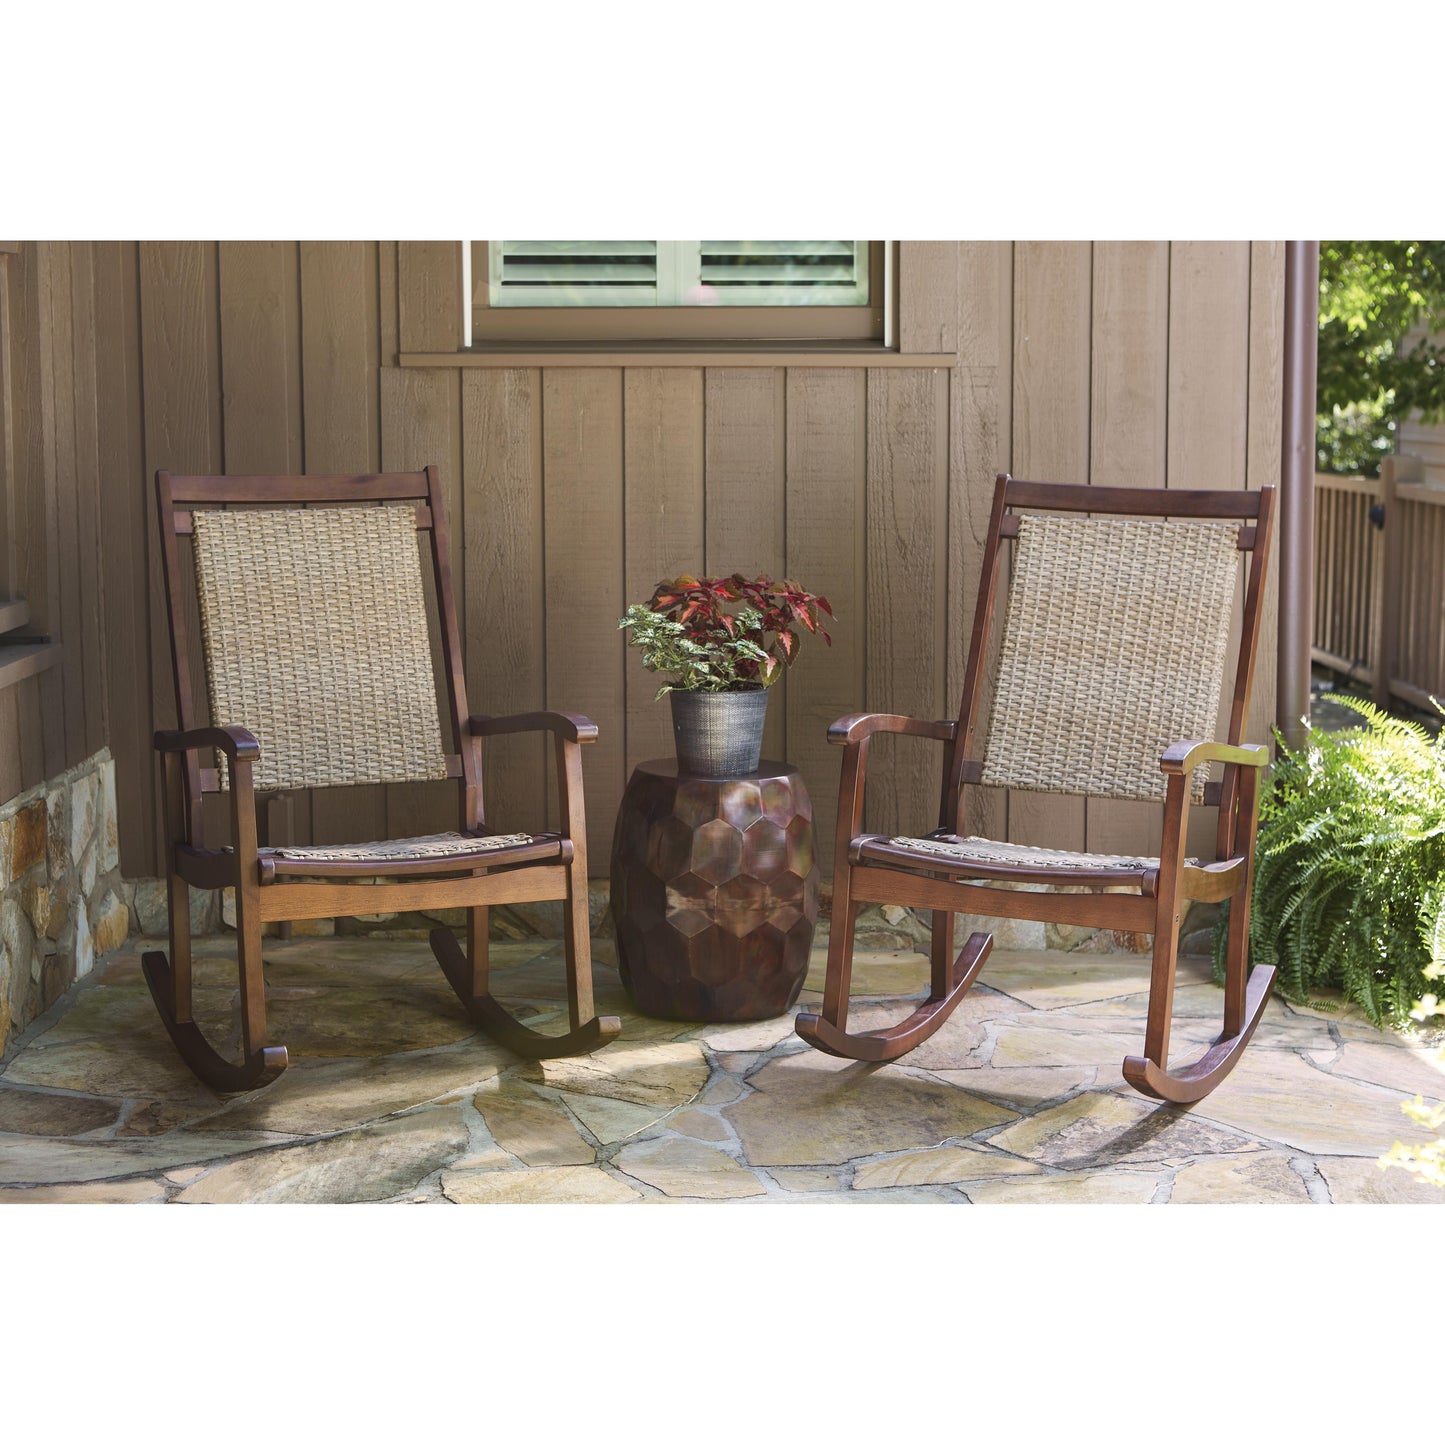 Signature Design by Ashley Outdoor Seating Rocking Chairs P168-827 IMAGE 6